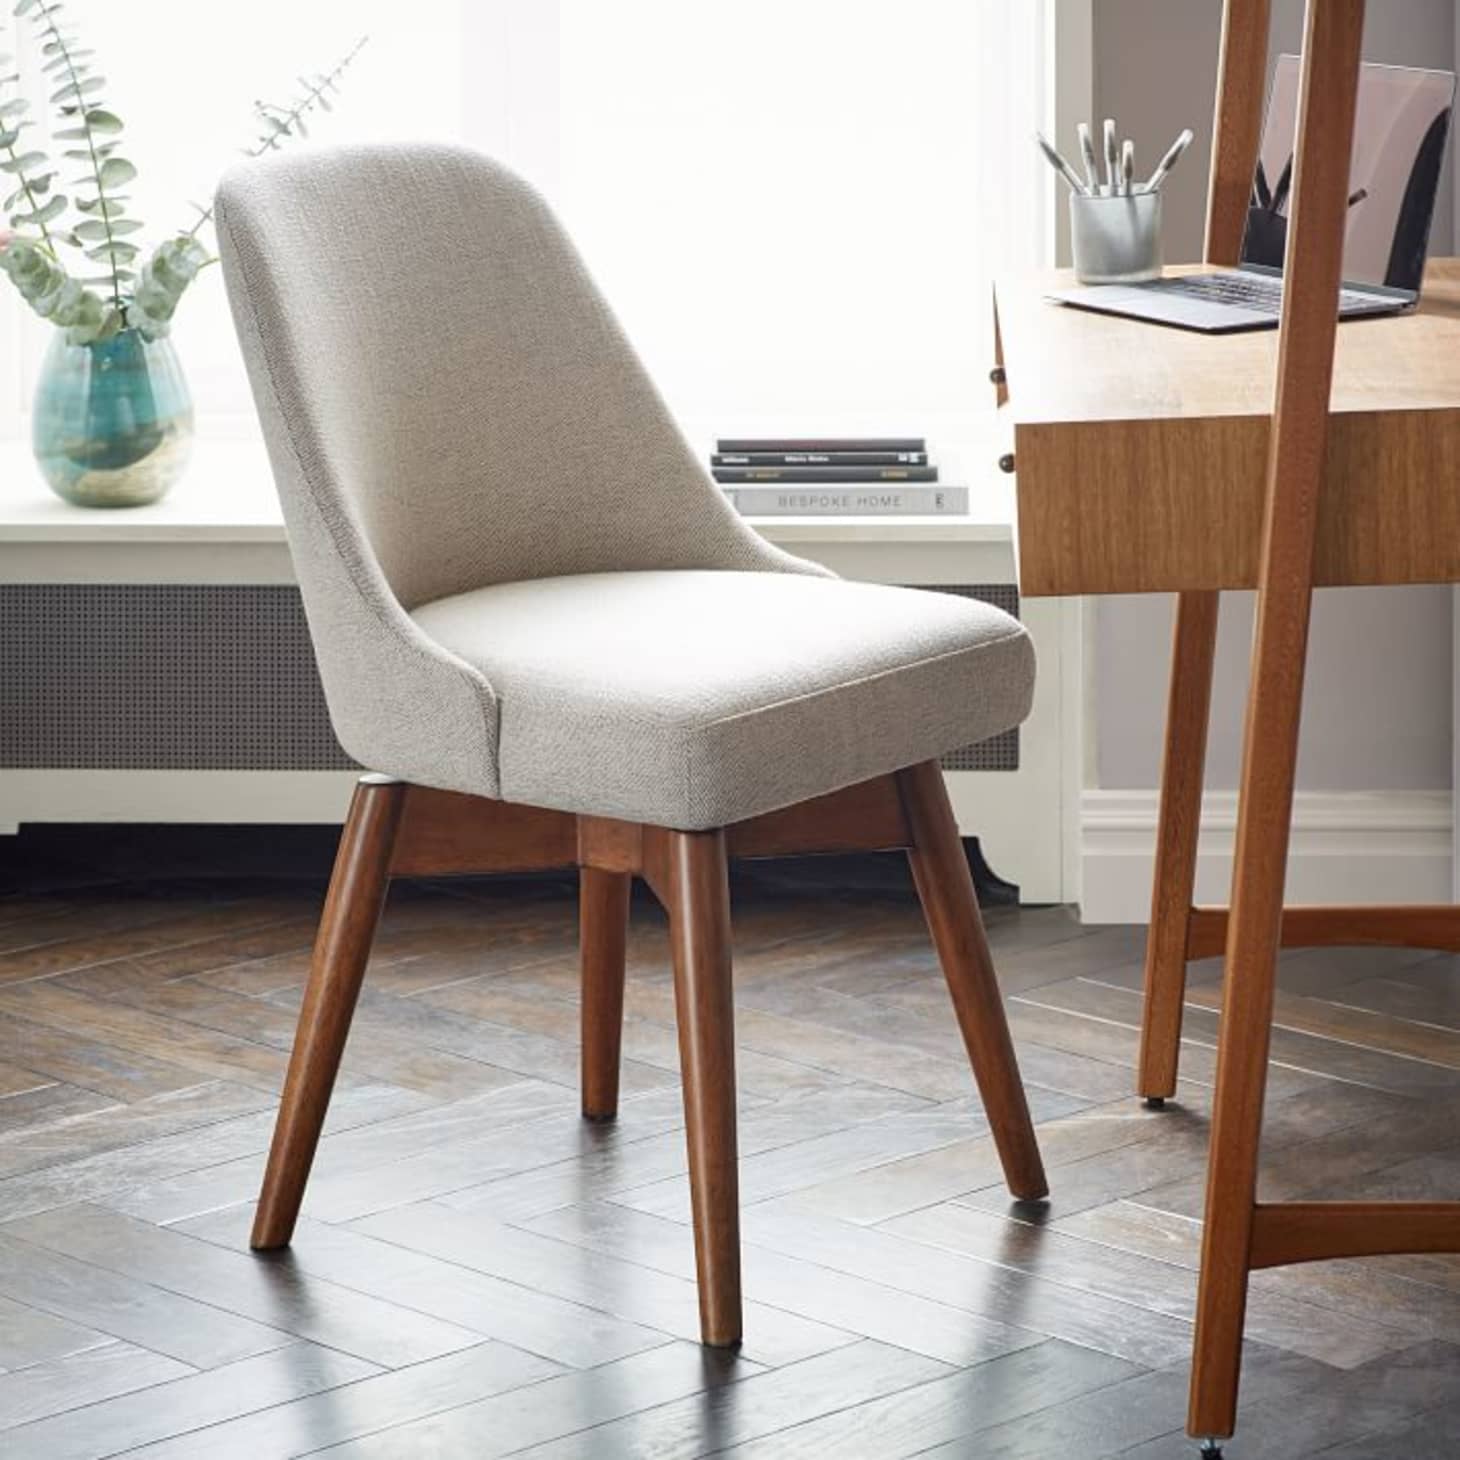 12 Comfortable Stylish Office Chairs For Work From Home Desks